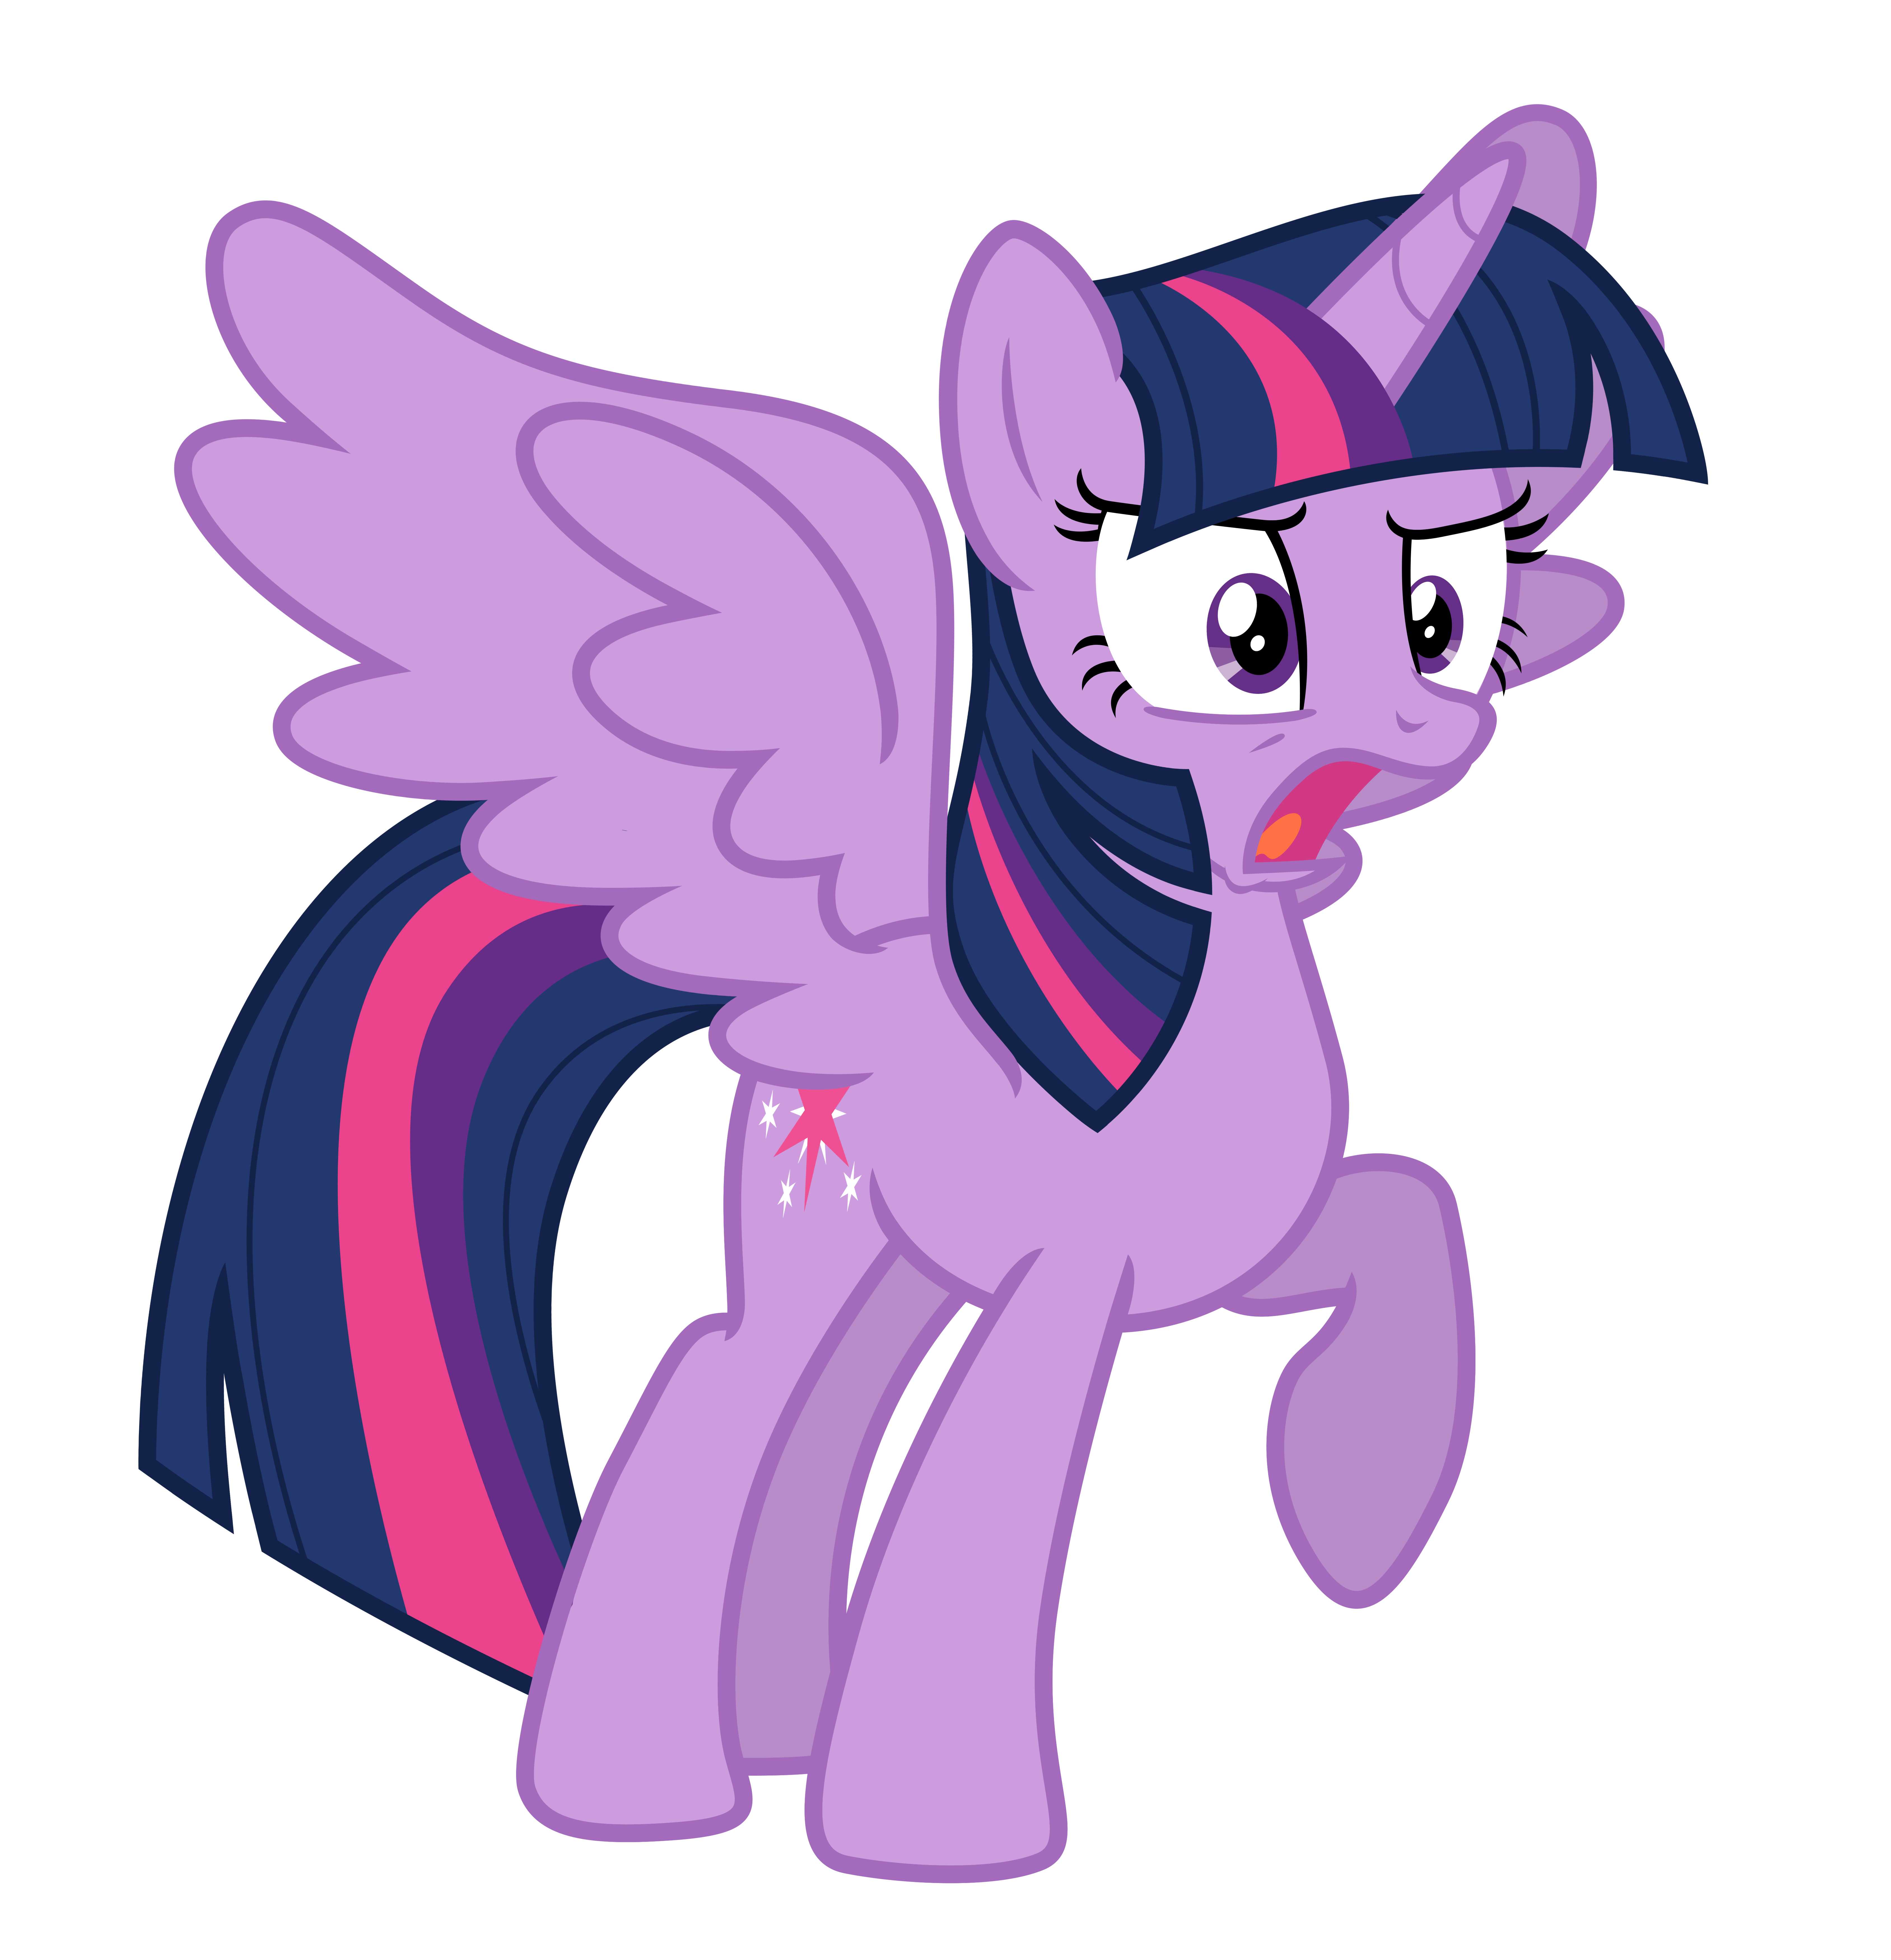 My Little Pony transparent PNG images without background